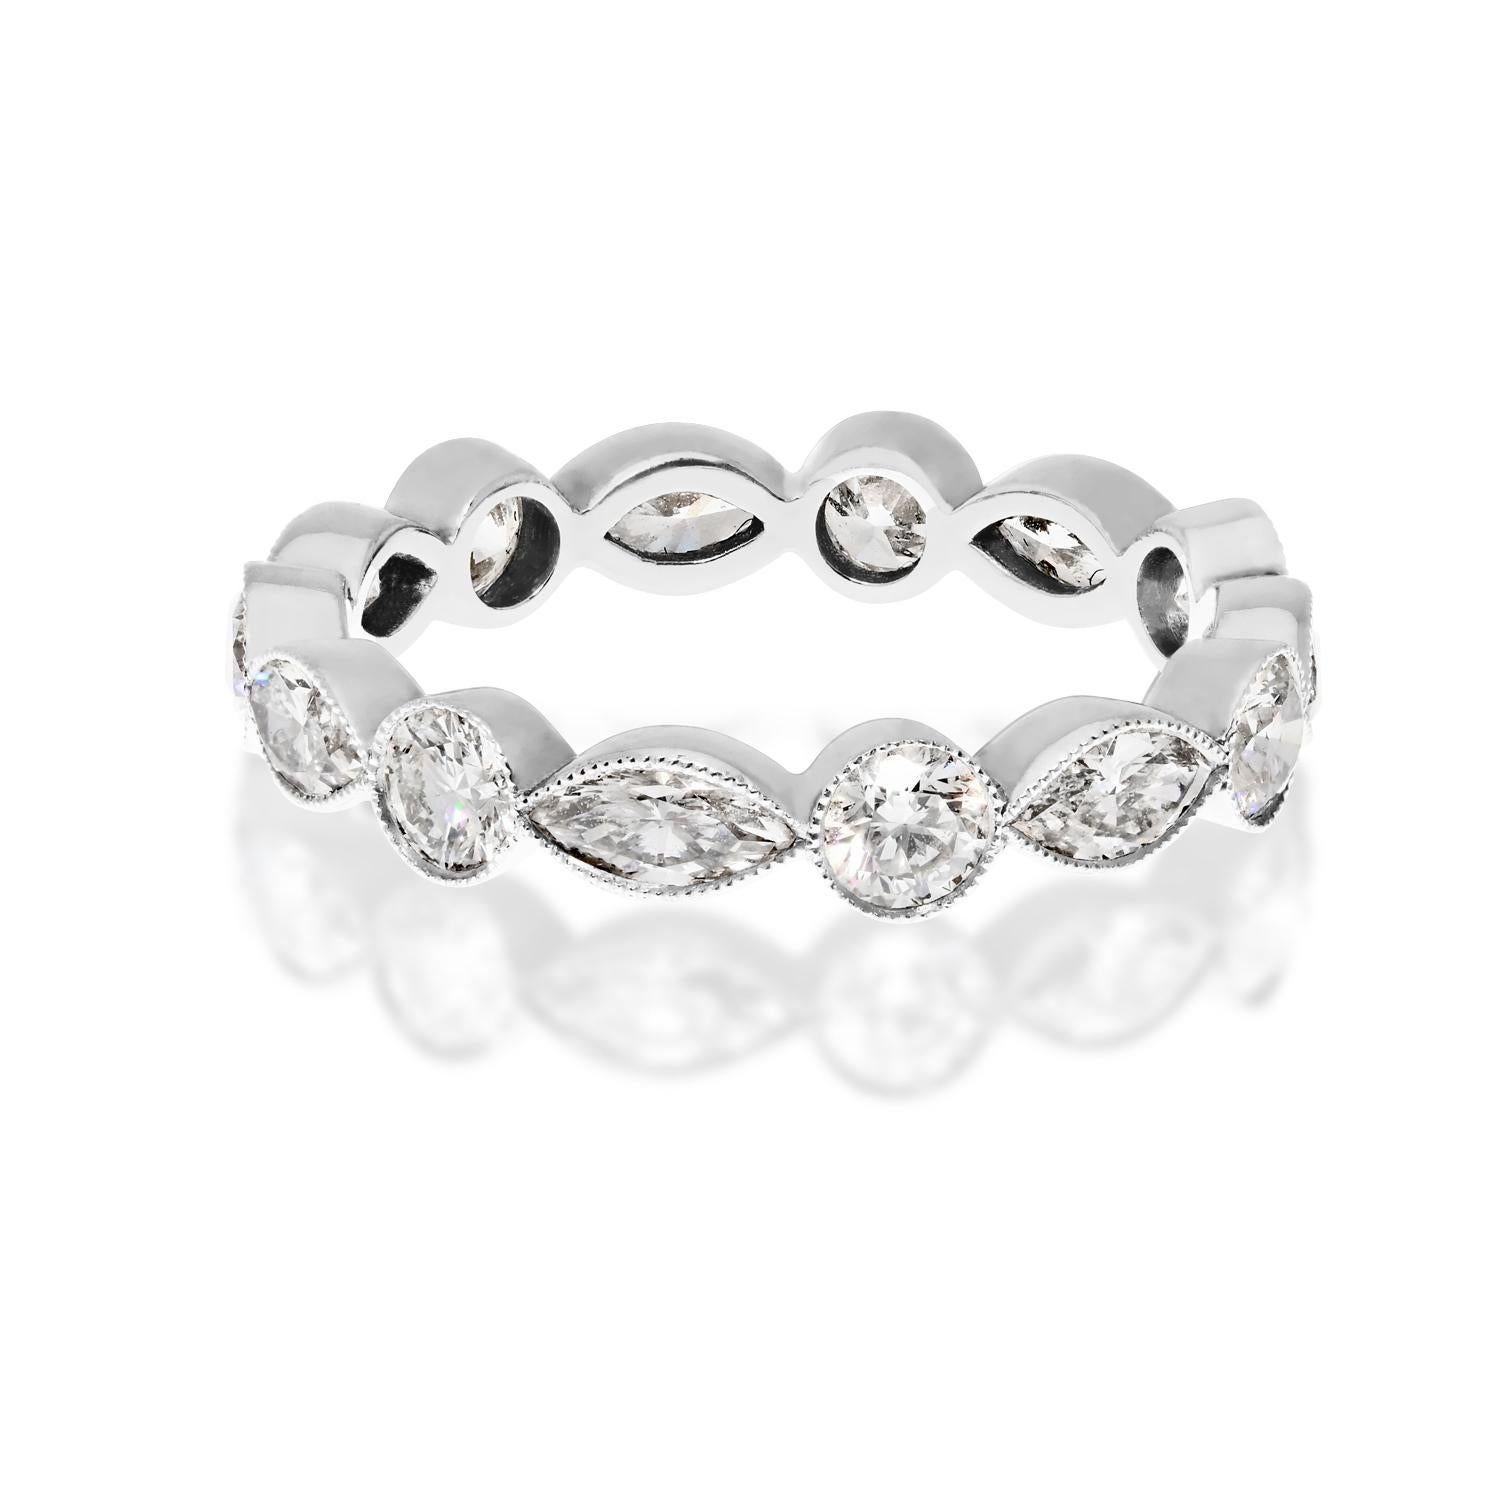 This handmade Platinum diamond eternity band is a stunning piece of jewelry that exudes luxury and sophistication. Set with alternating marquise and round cut diamonds in bezels, the design is both elegant and timeless.

With a ring width of 3.7mm